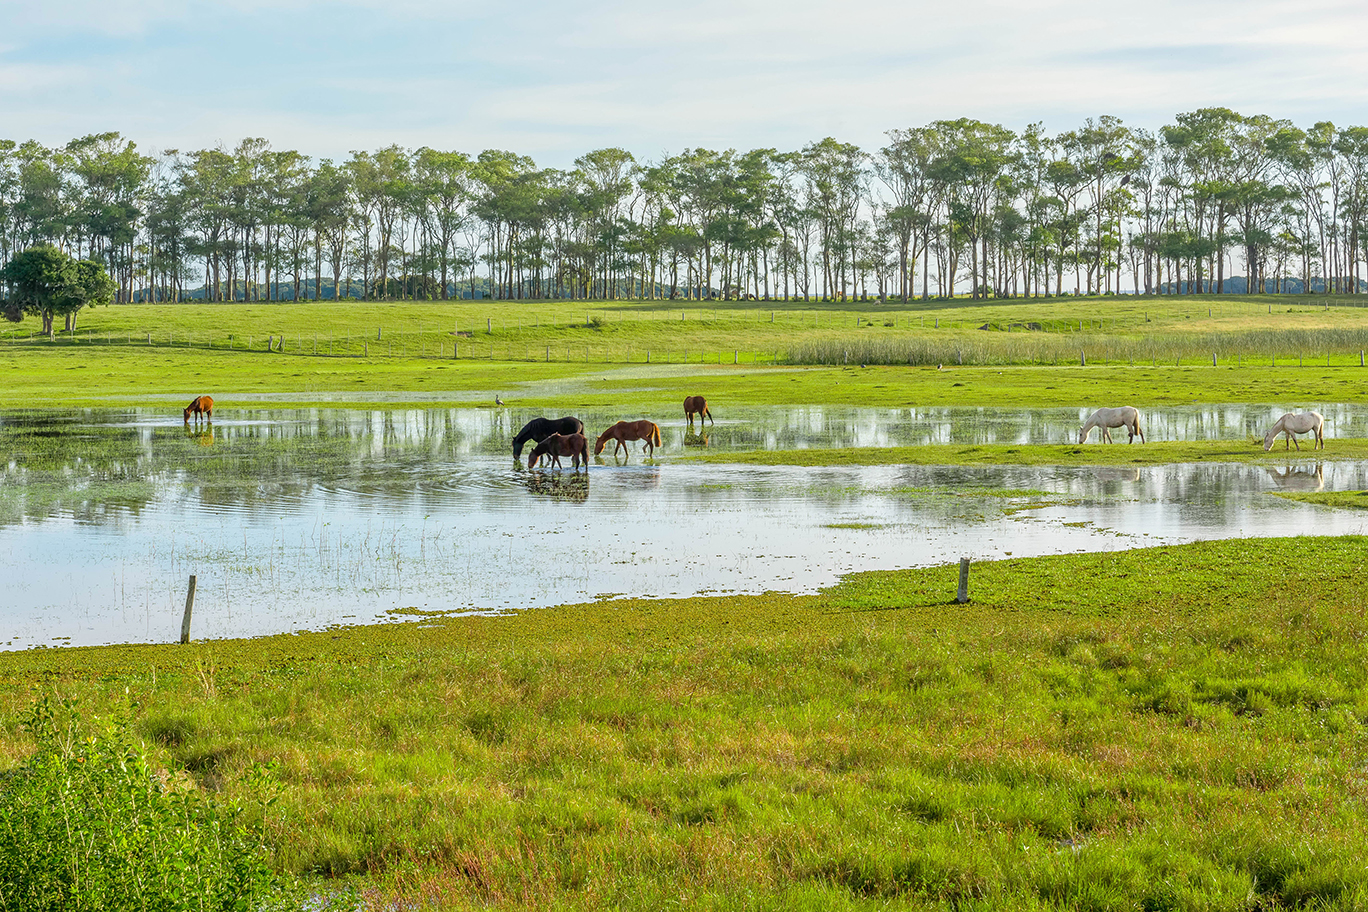 Horses standing in flooded paddock